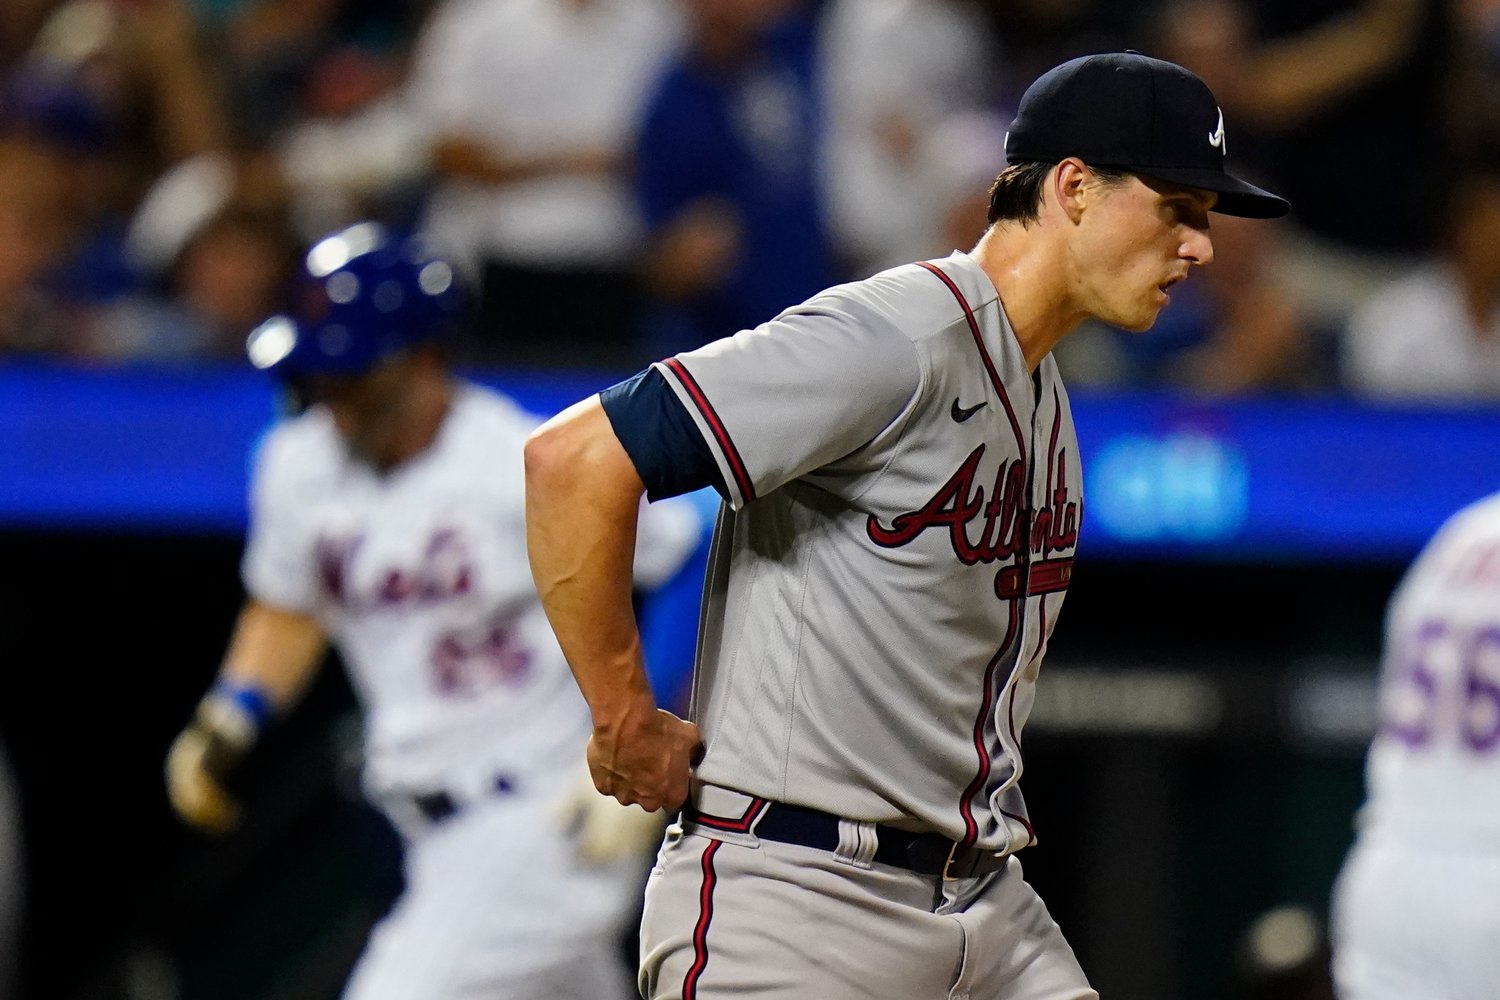 Atlanta Braves starting pitcher Kyle Wright waits as New York Mets' Tyler Naquin runs the bases after hitting a home run during the sixth inning of a baseball game Thursday, Aug. 4, 2022, in New York. (AP Photo/Frank Franklin II)